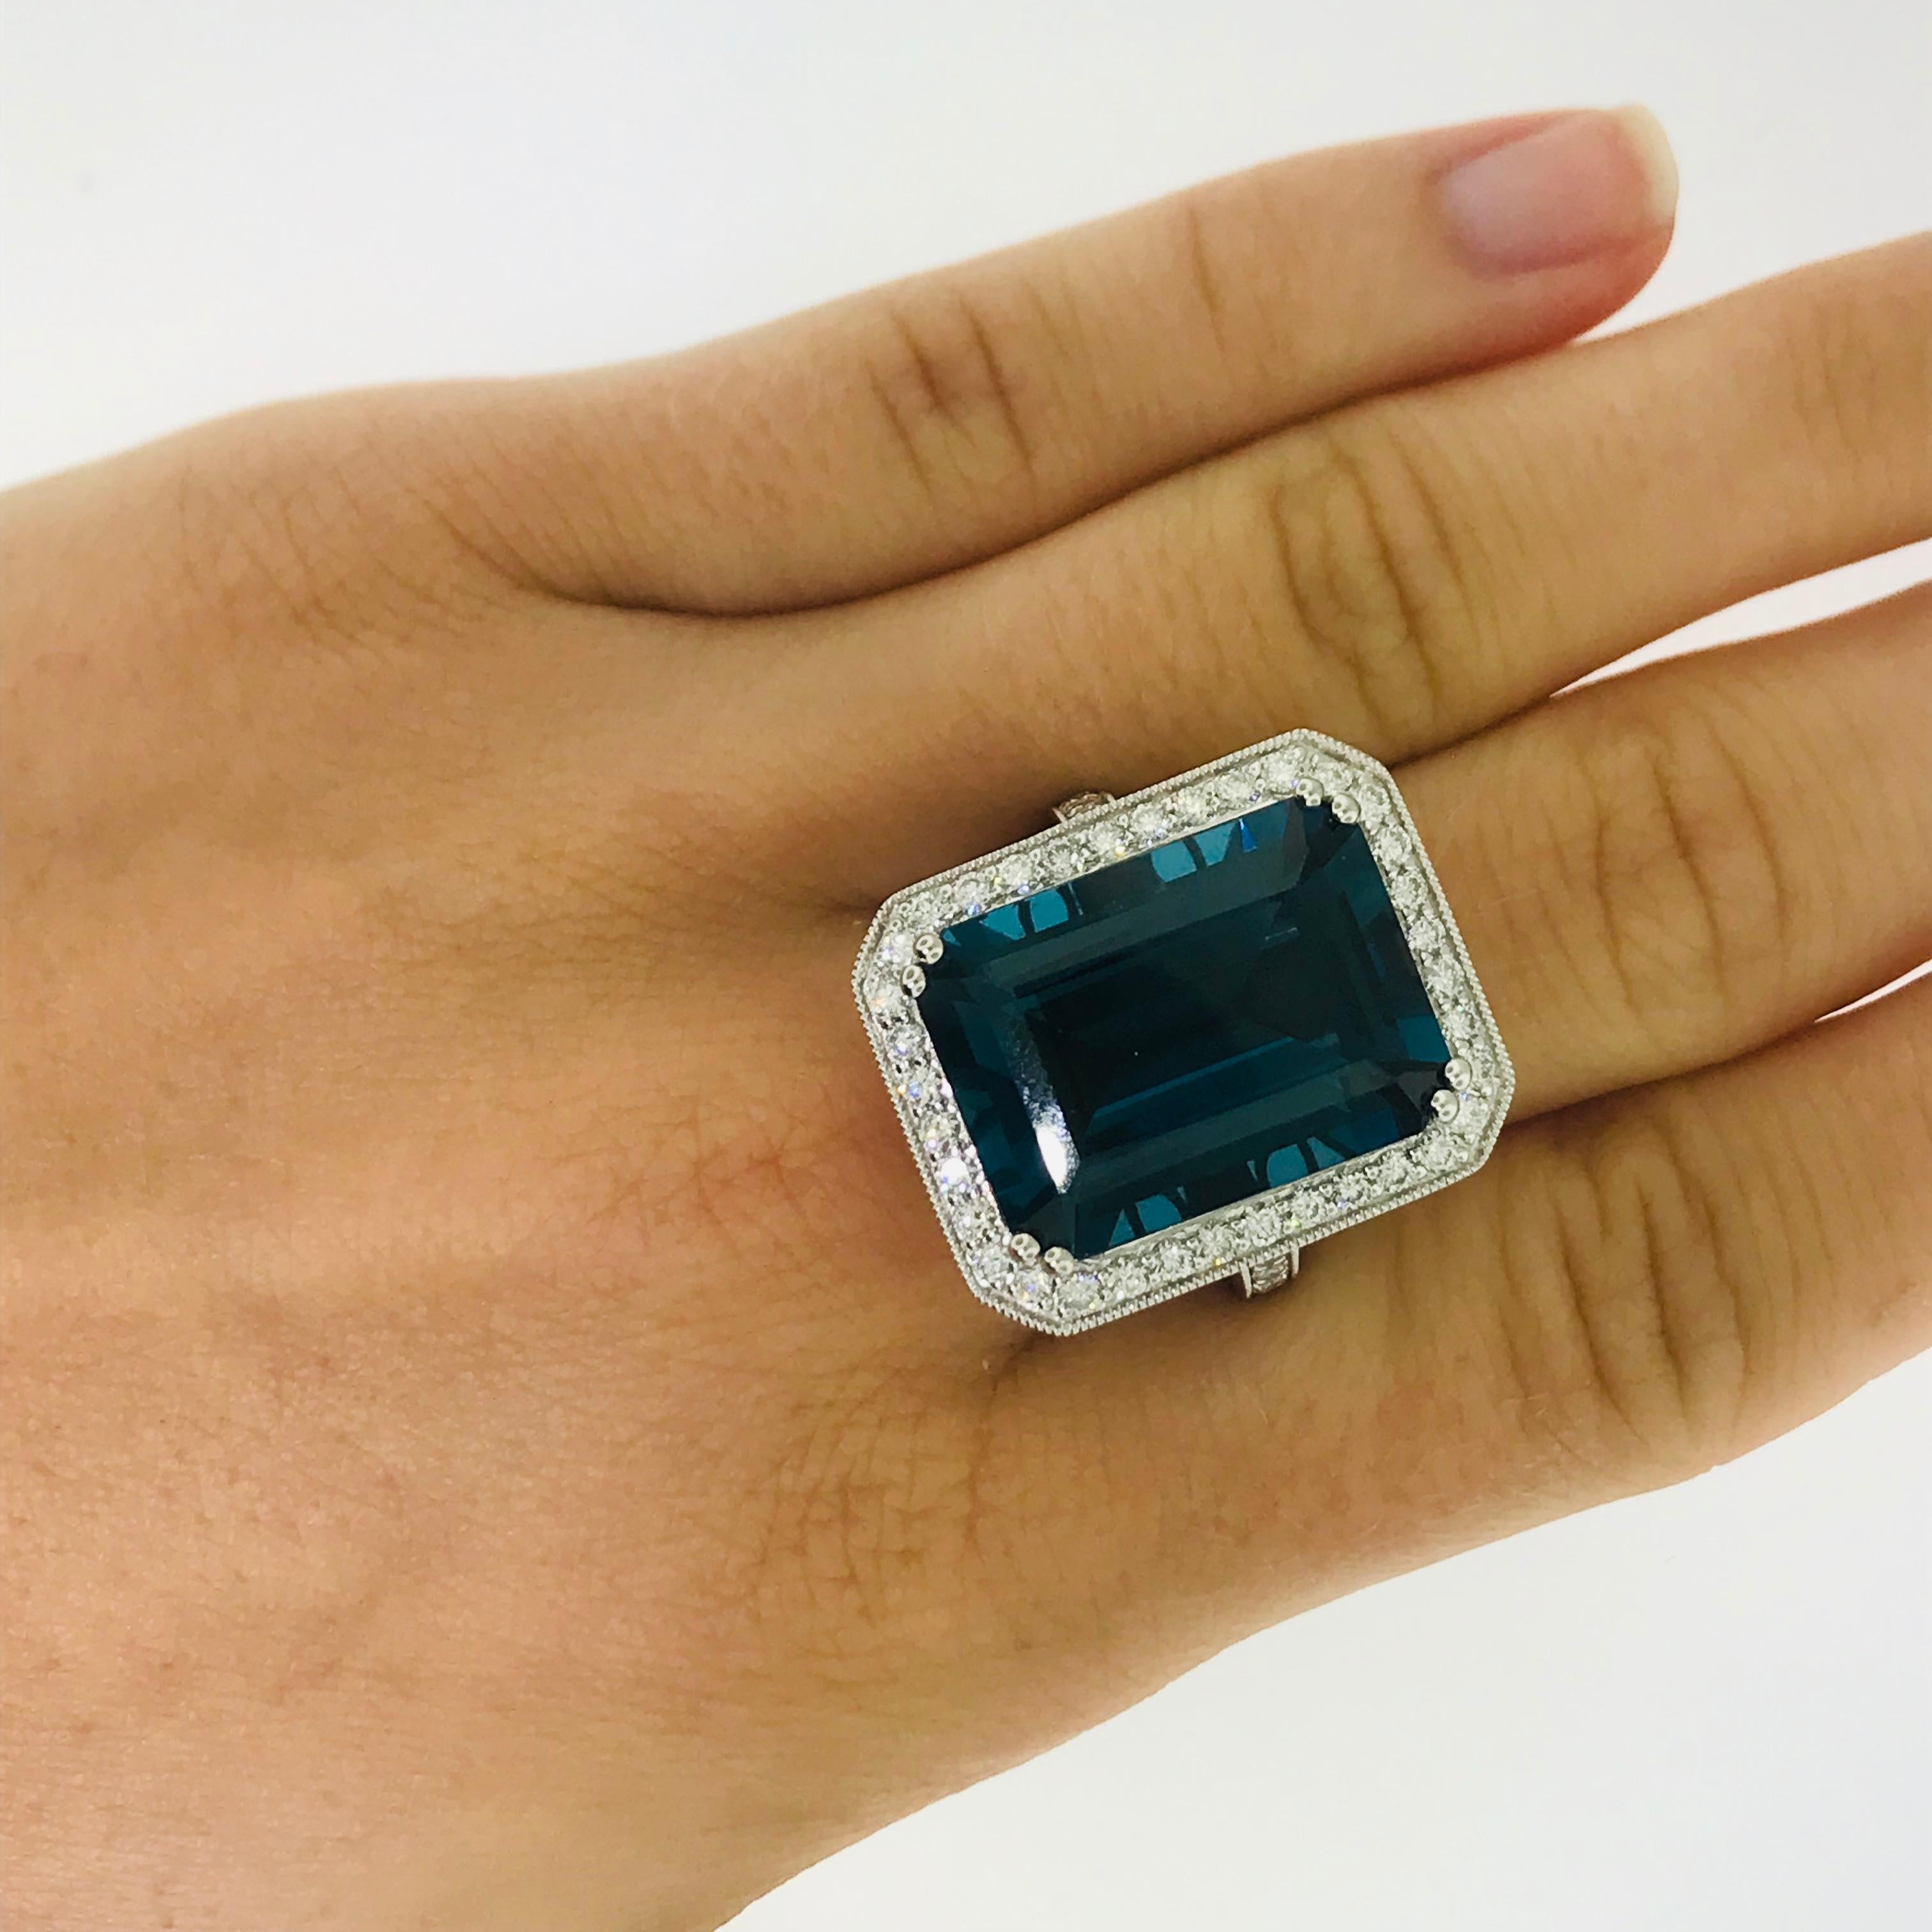 London  Royal Blue Topaz and Diamond Cocktail Ring-in stock

This remarkable cocktail ring is marvelous and breathtaking and sure to match any personality! With a 29.40 carat emerald cut London blue topaz this ring would be a perfect plus one to any